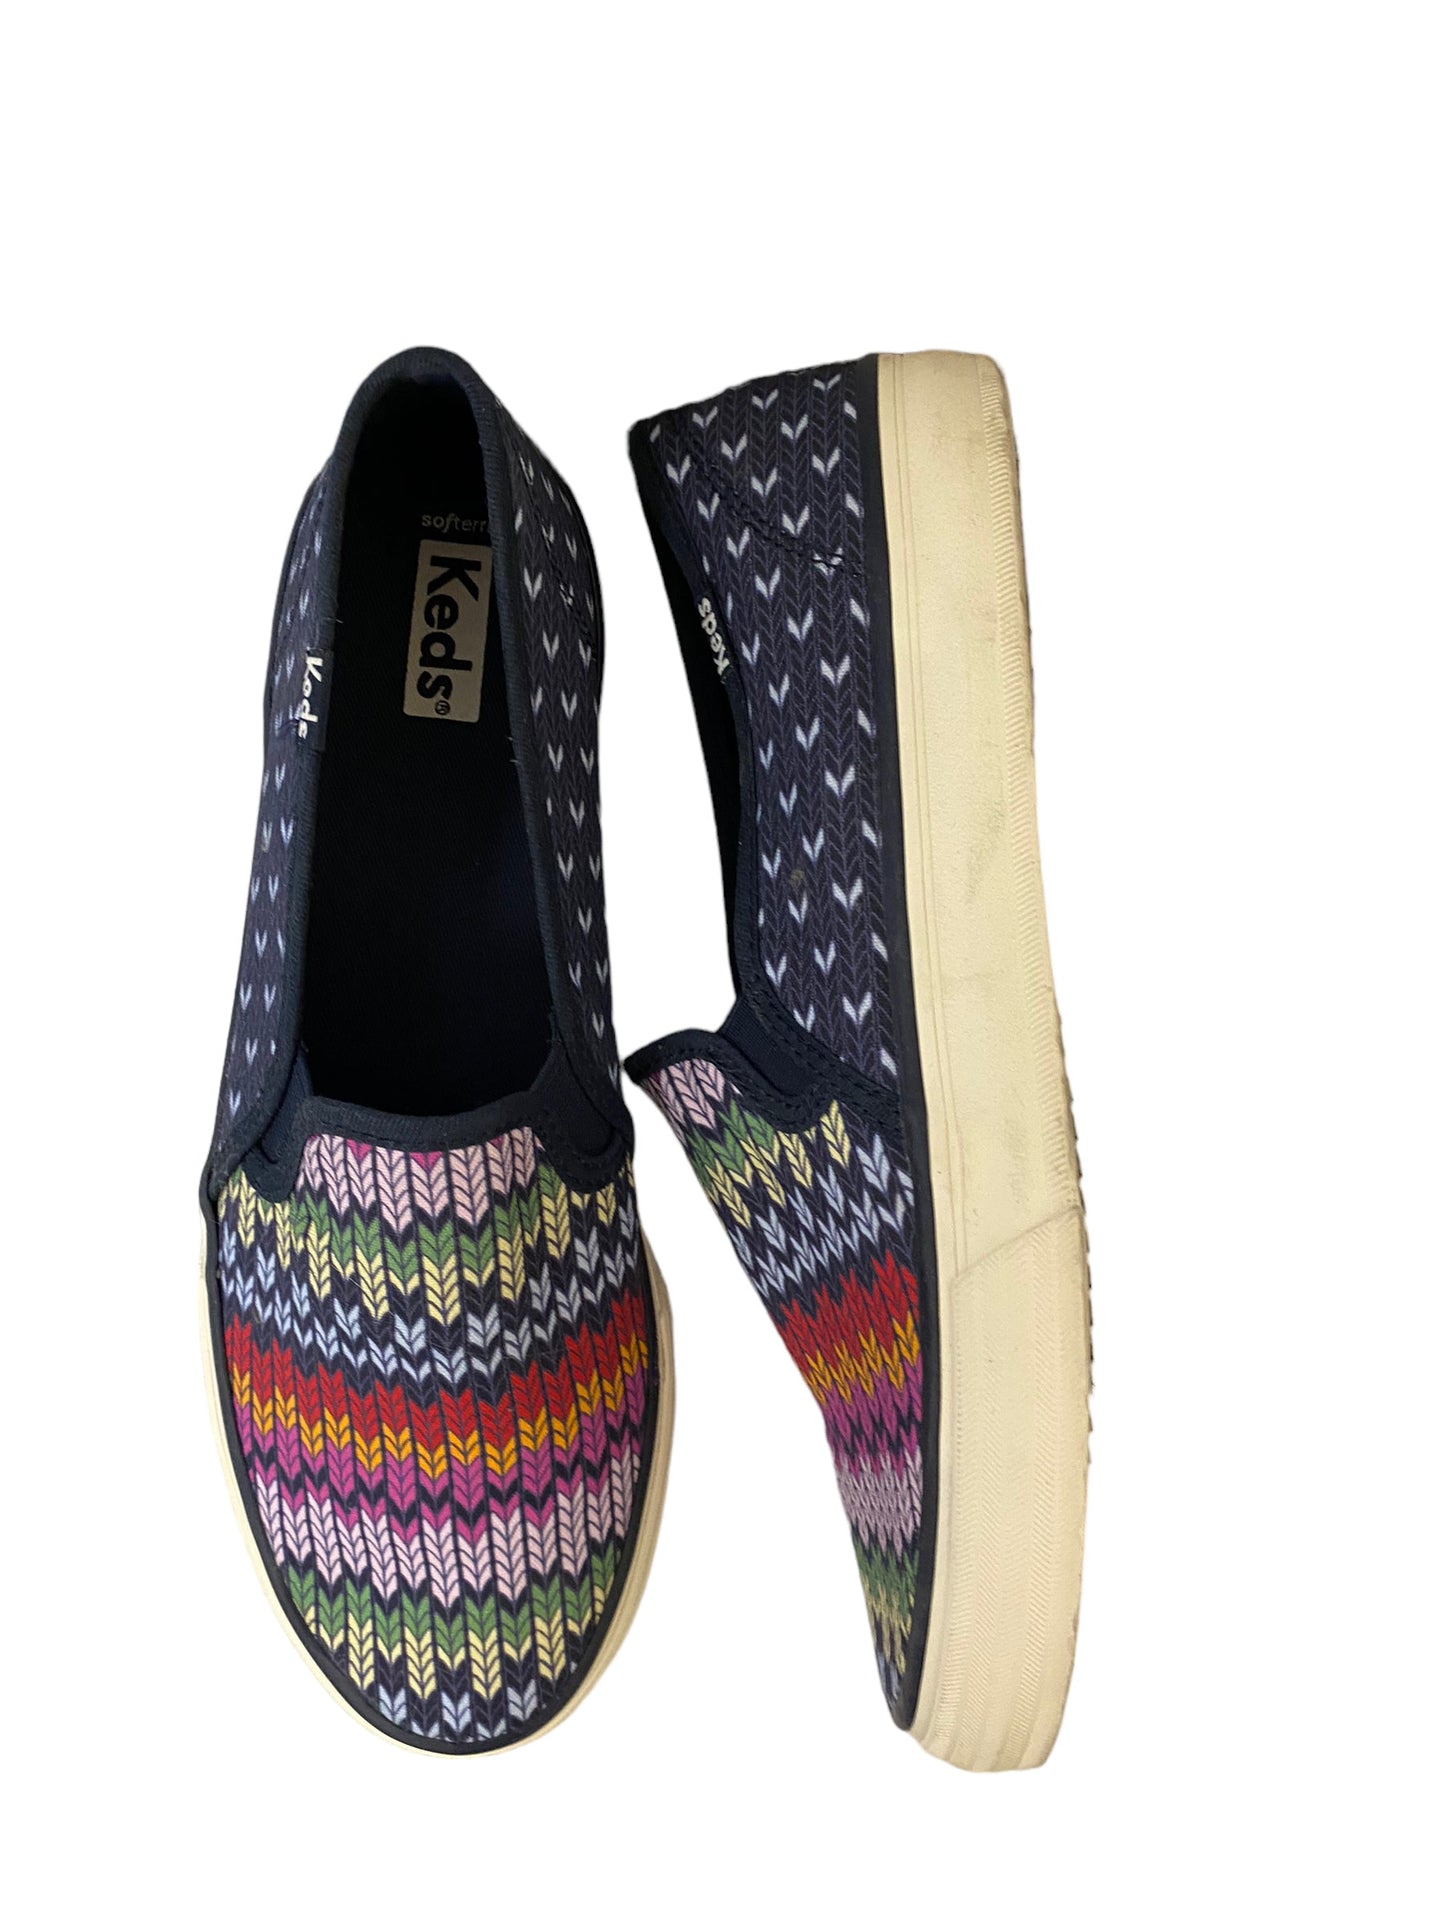 Shoes Flats Boat By Keds  Size: 8